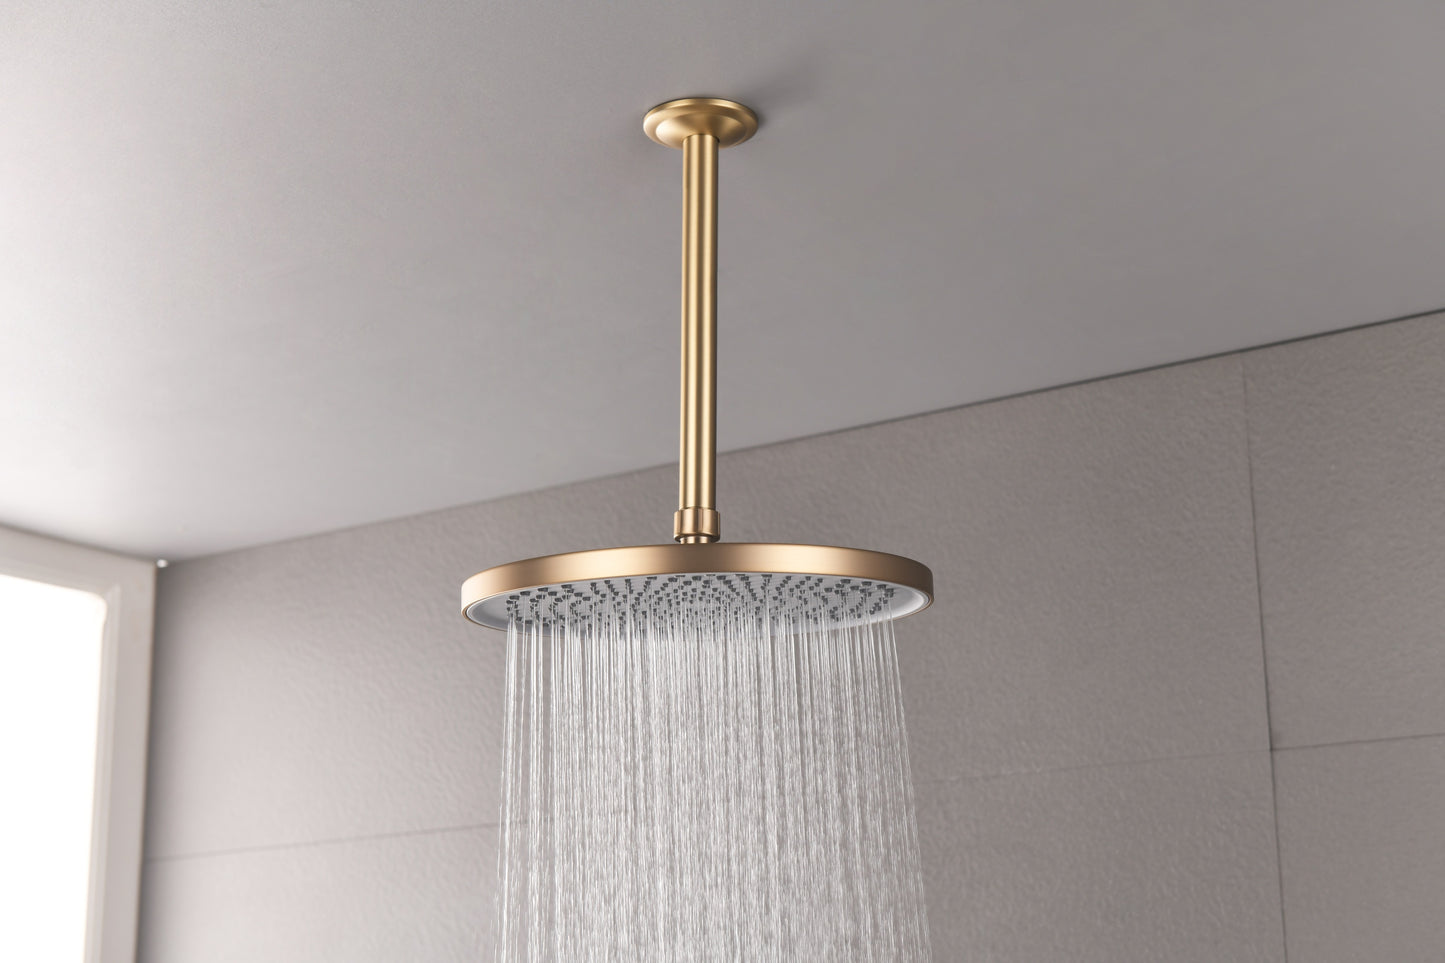 Shower Head - High Pressure Rain - Luxury Modern Look - No Hassle Tool-less 1-Min Installation - The Perfect Adjustable Replacement For Your Bathroom Shower Heads